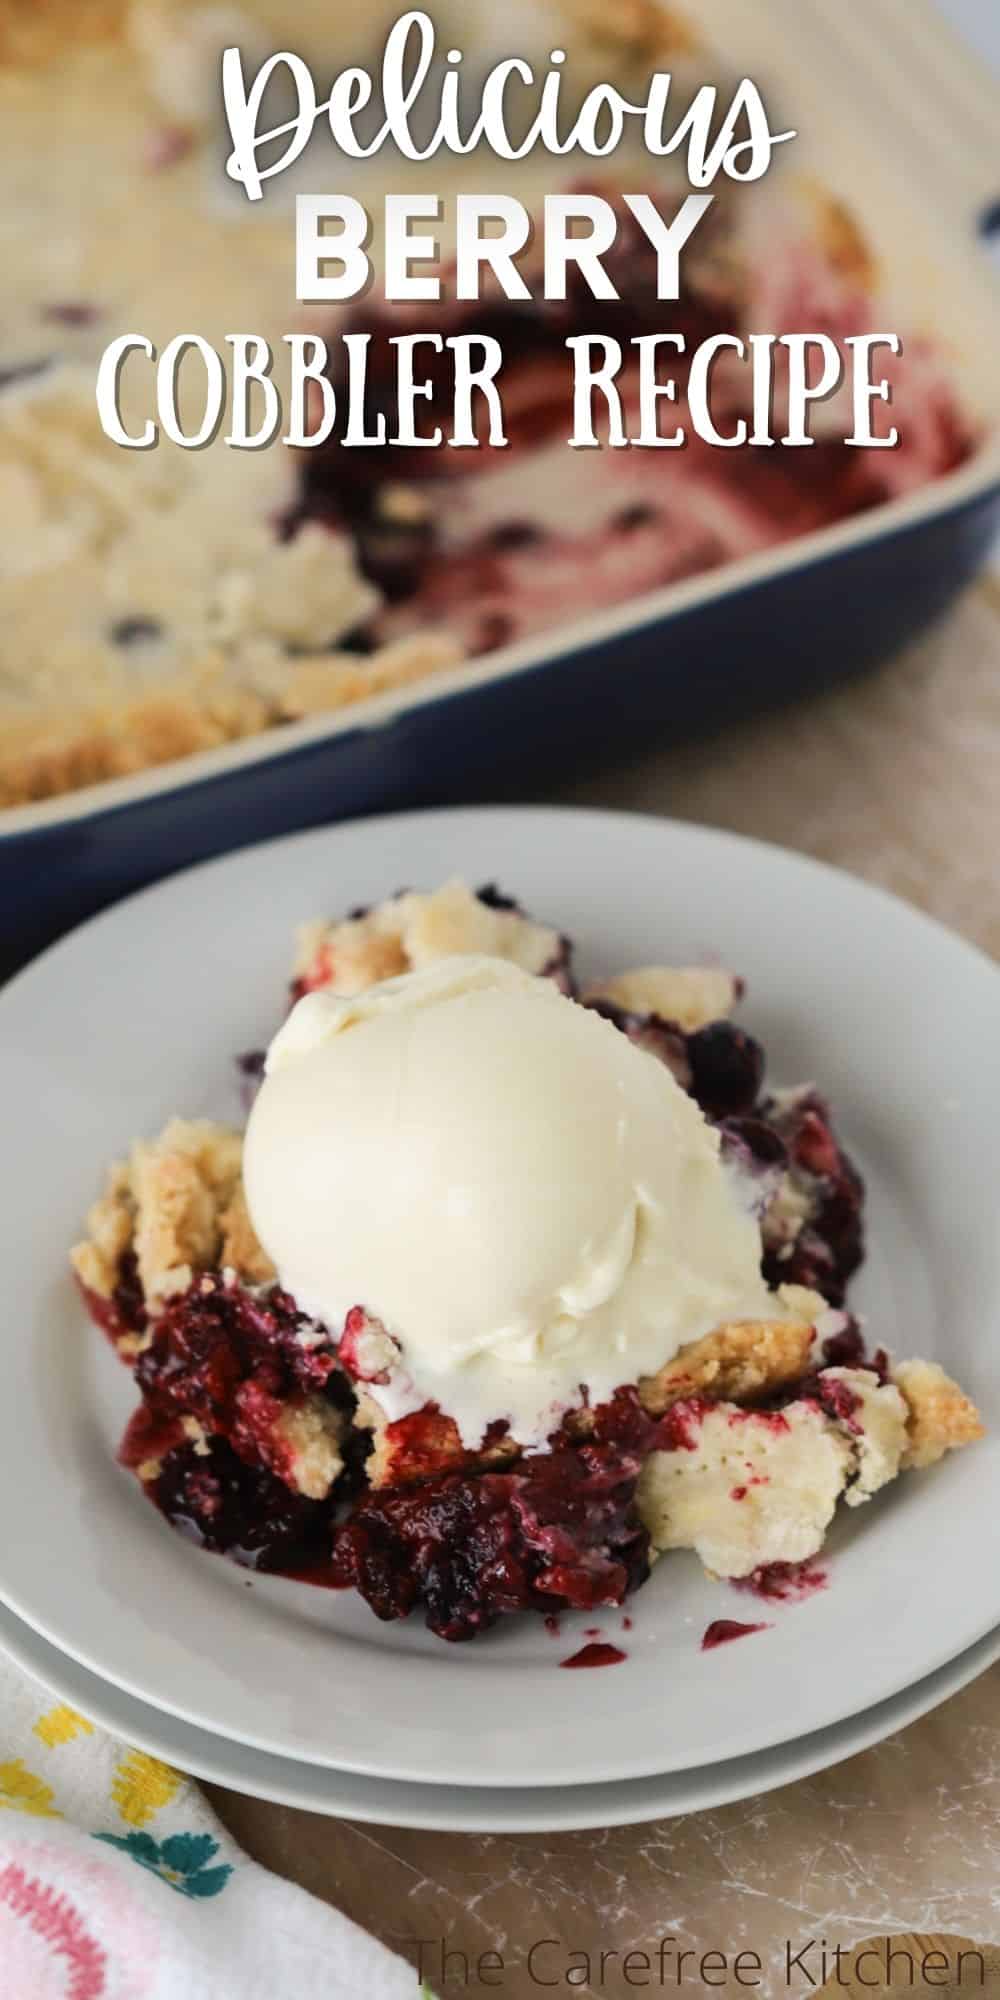 Easy Berry Cobbler Recipe - The Carefree Kitchen